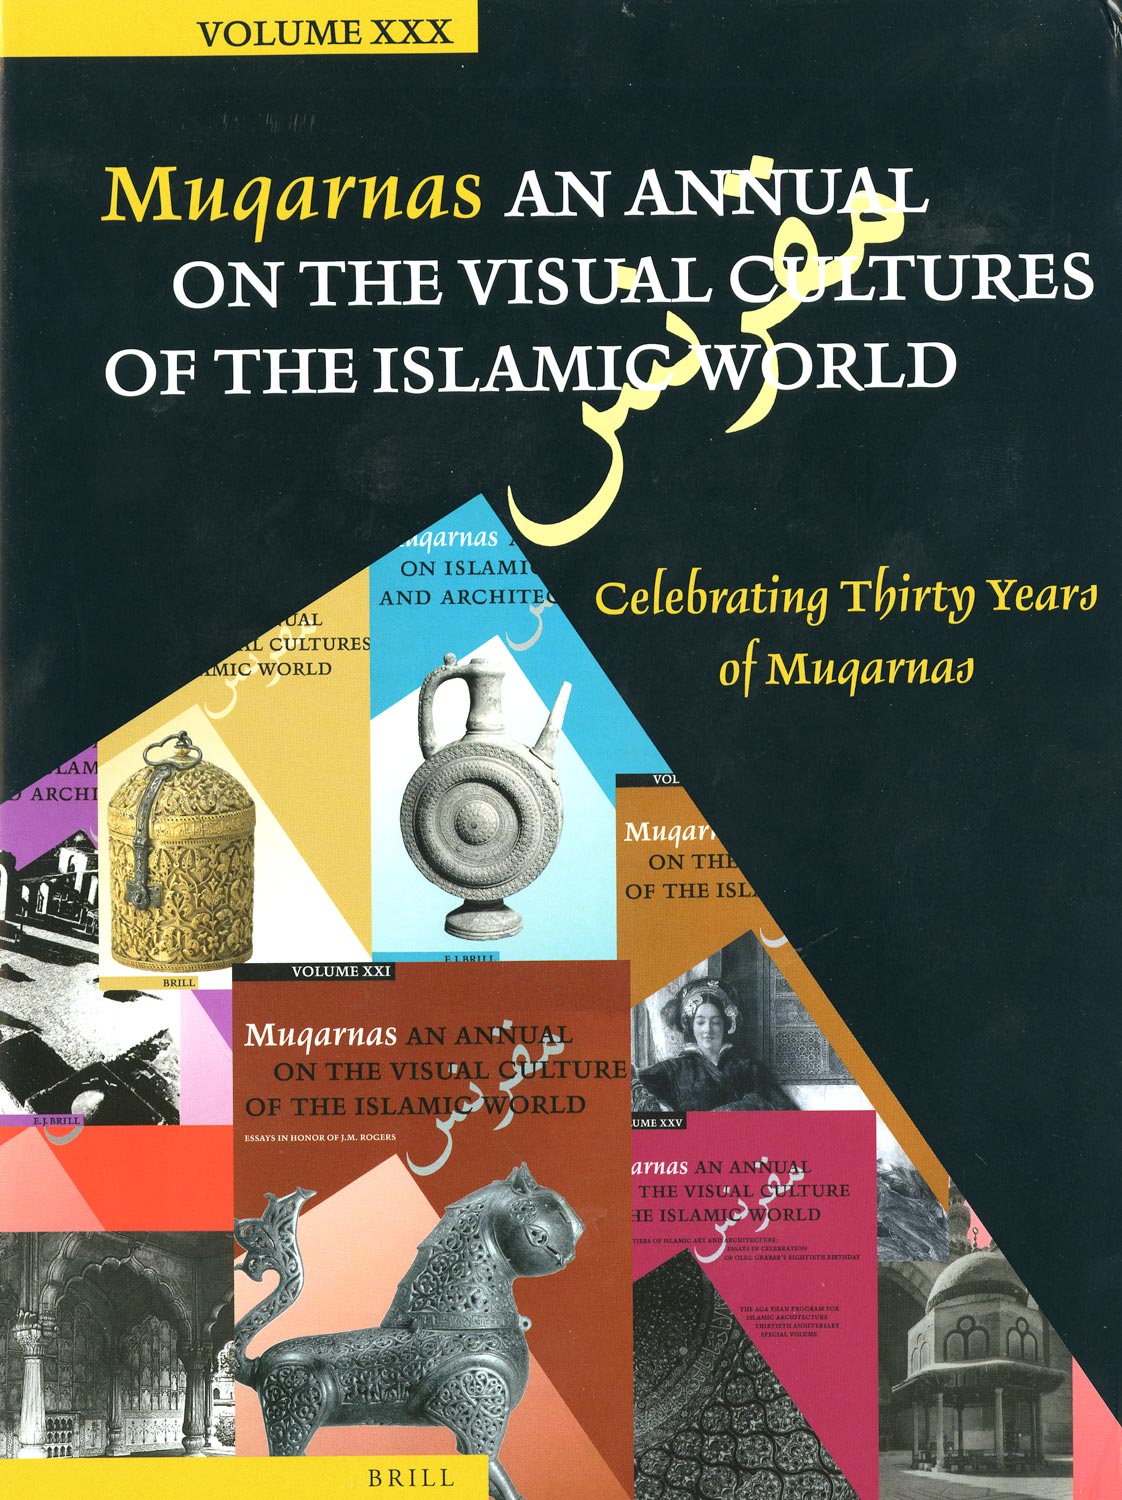 Muqarnas Volume XXX: An Annual on the Visual Cultures of the Islamic World